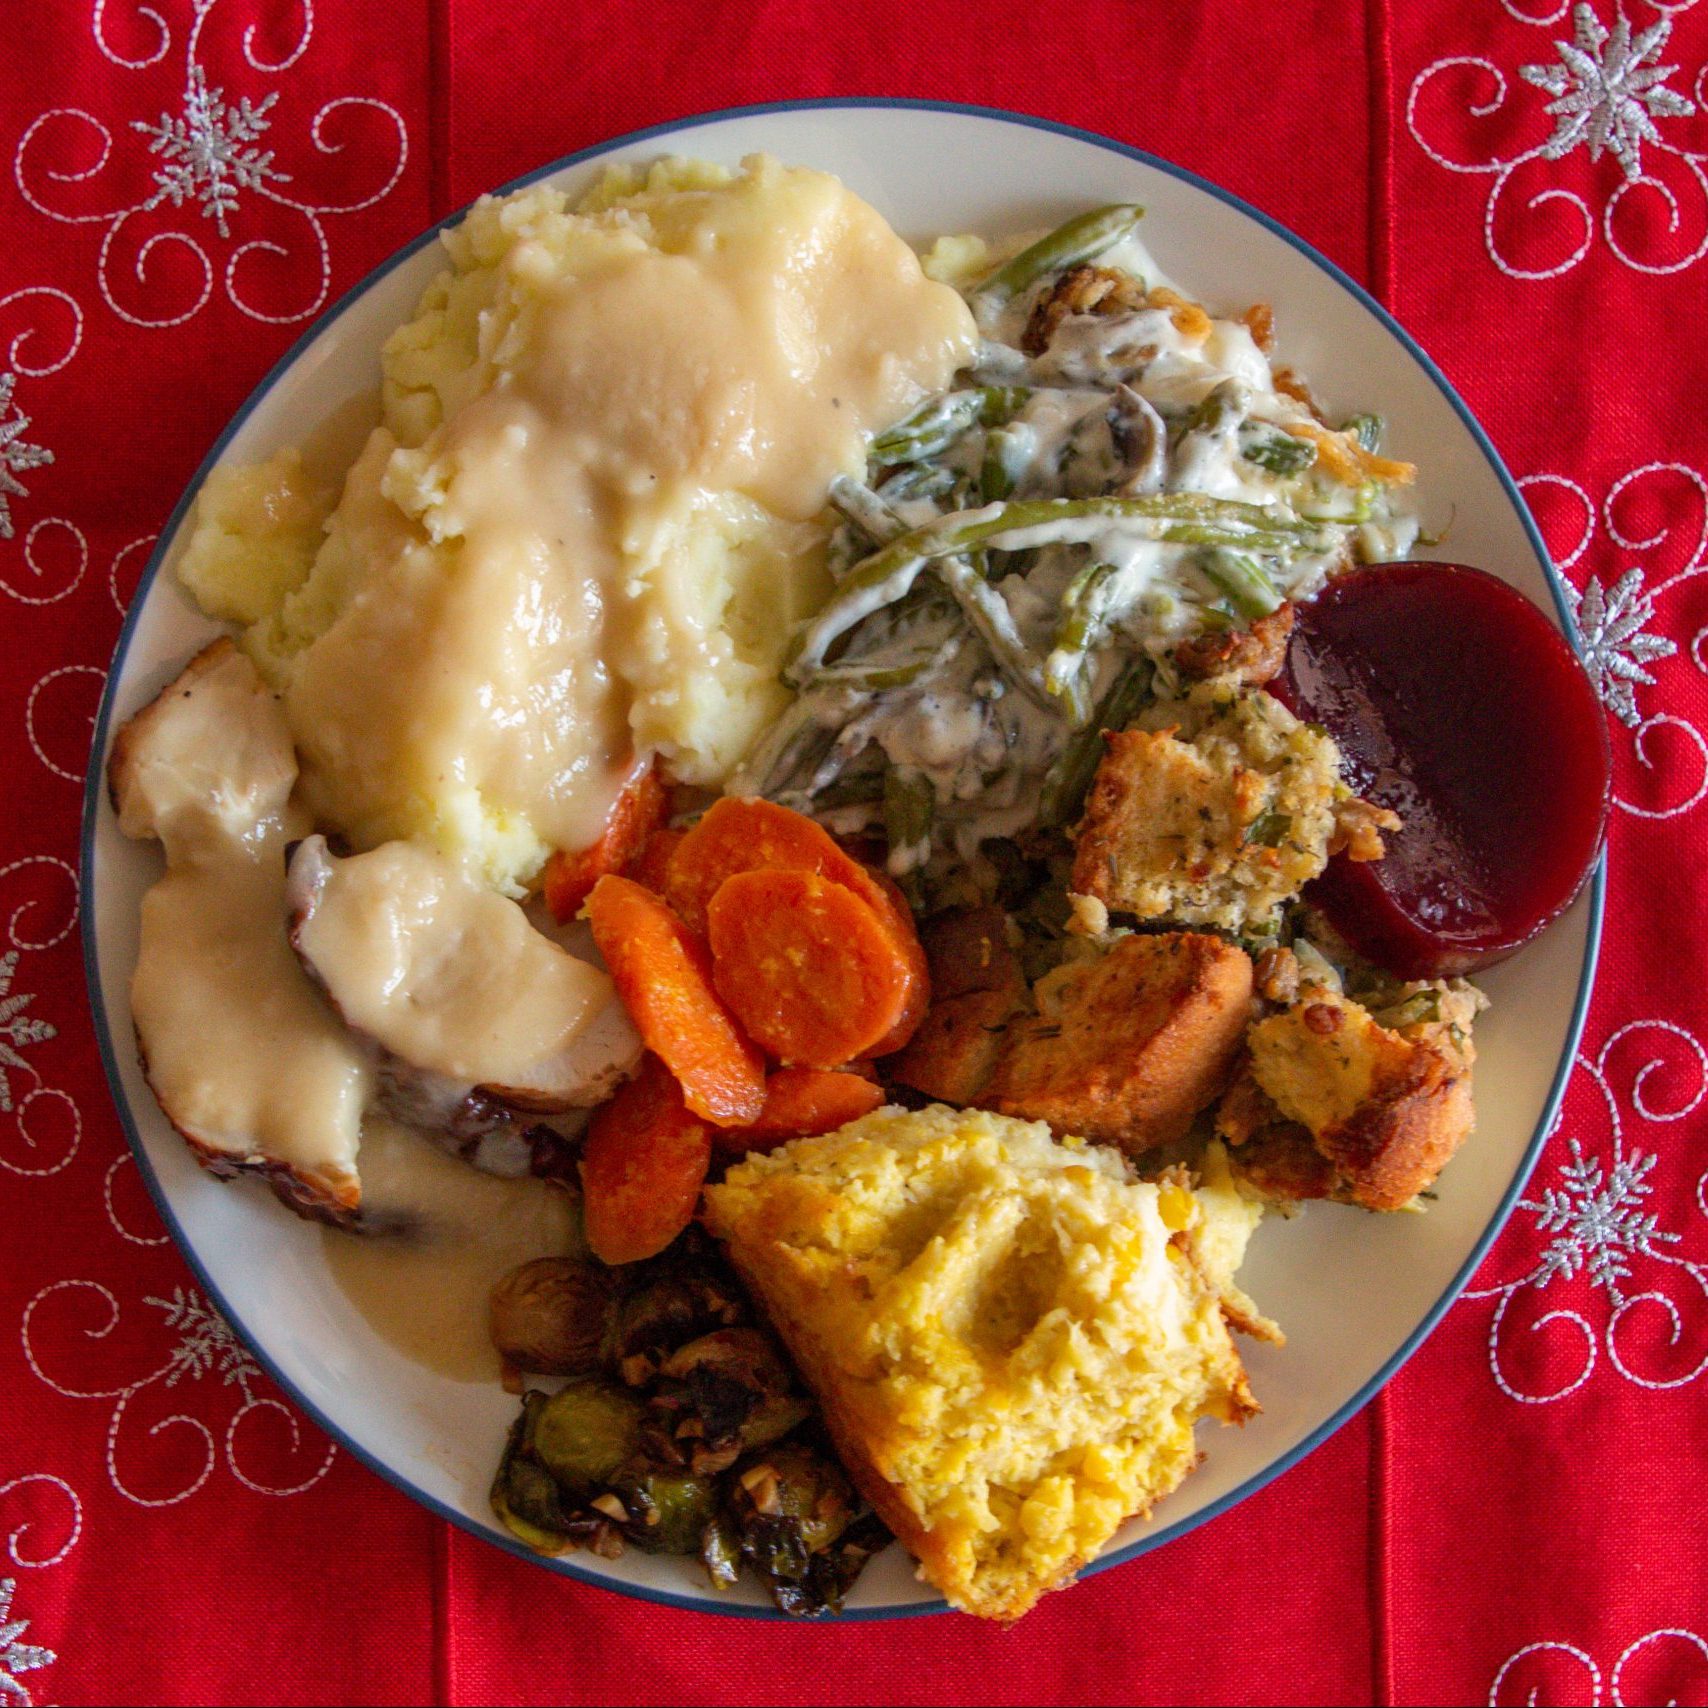 Turkey gravy is a must for Thanksgiving - here's a no-fail recipe!